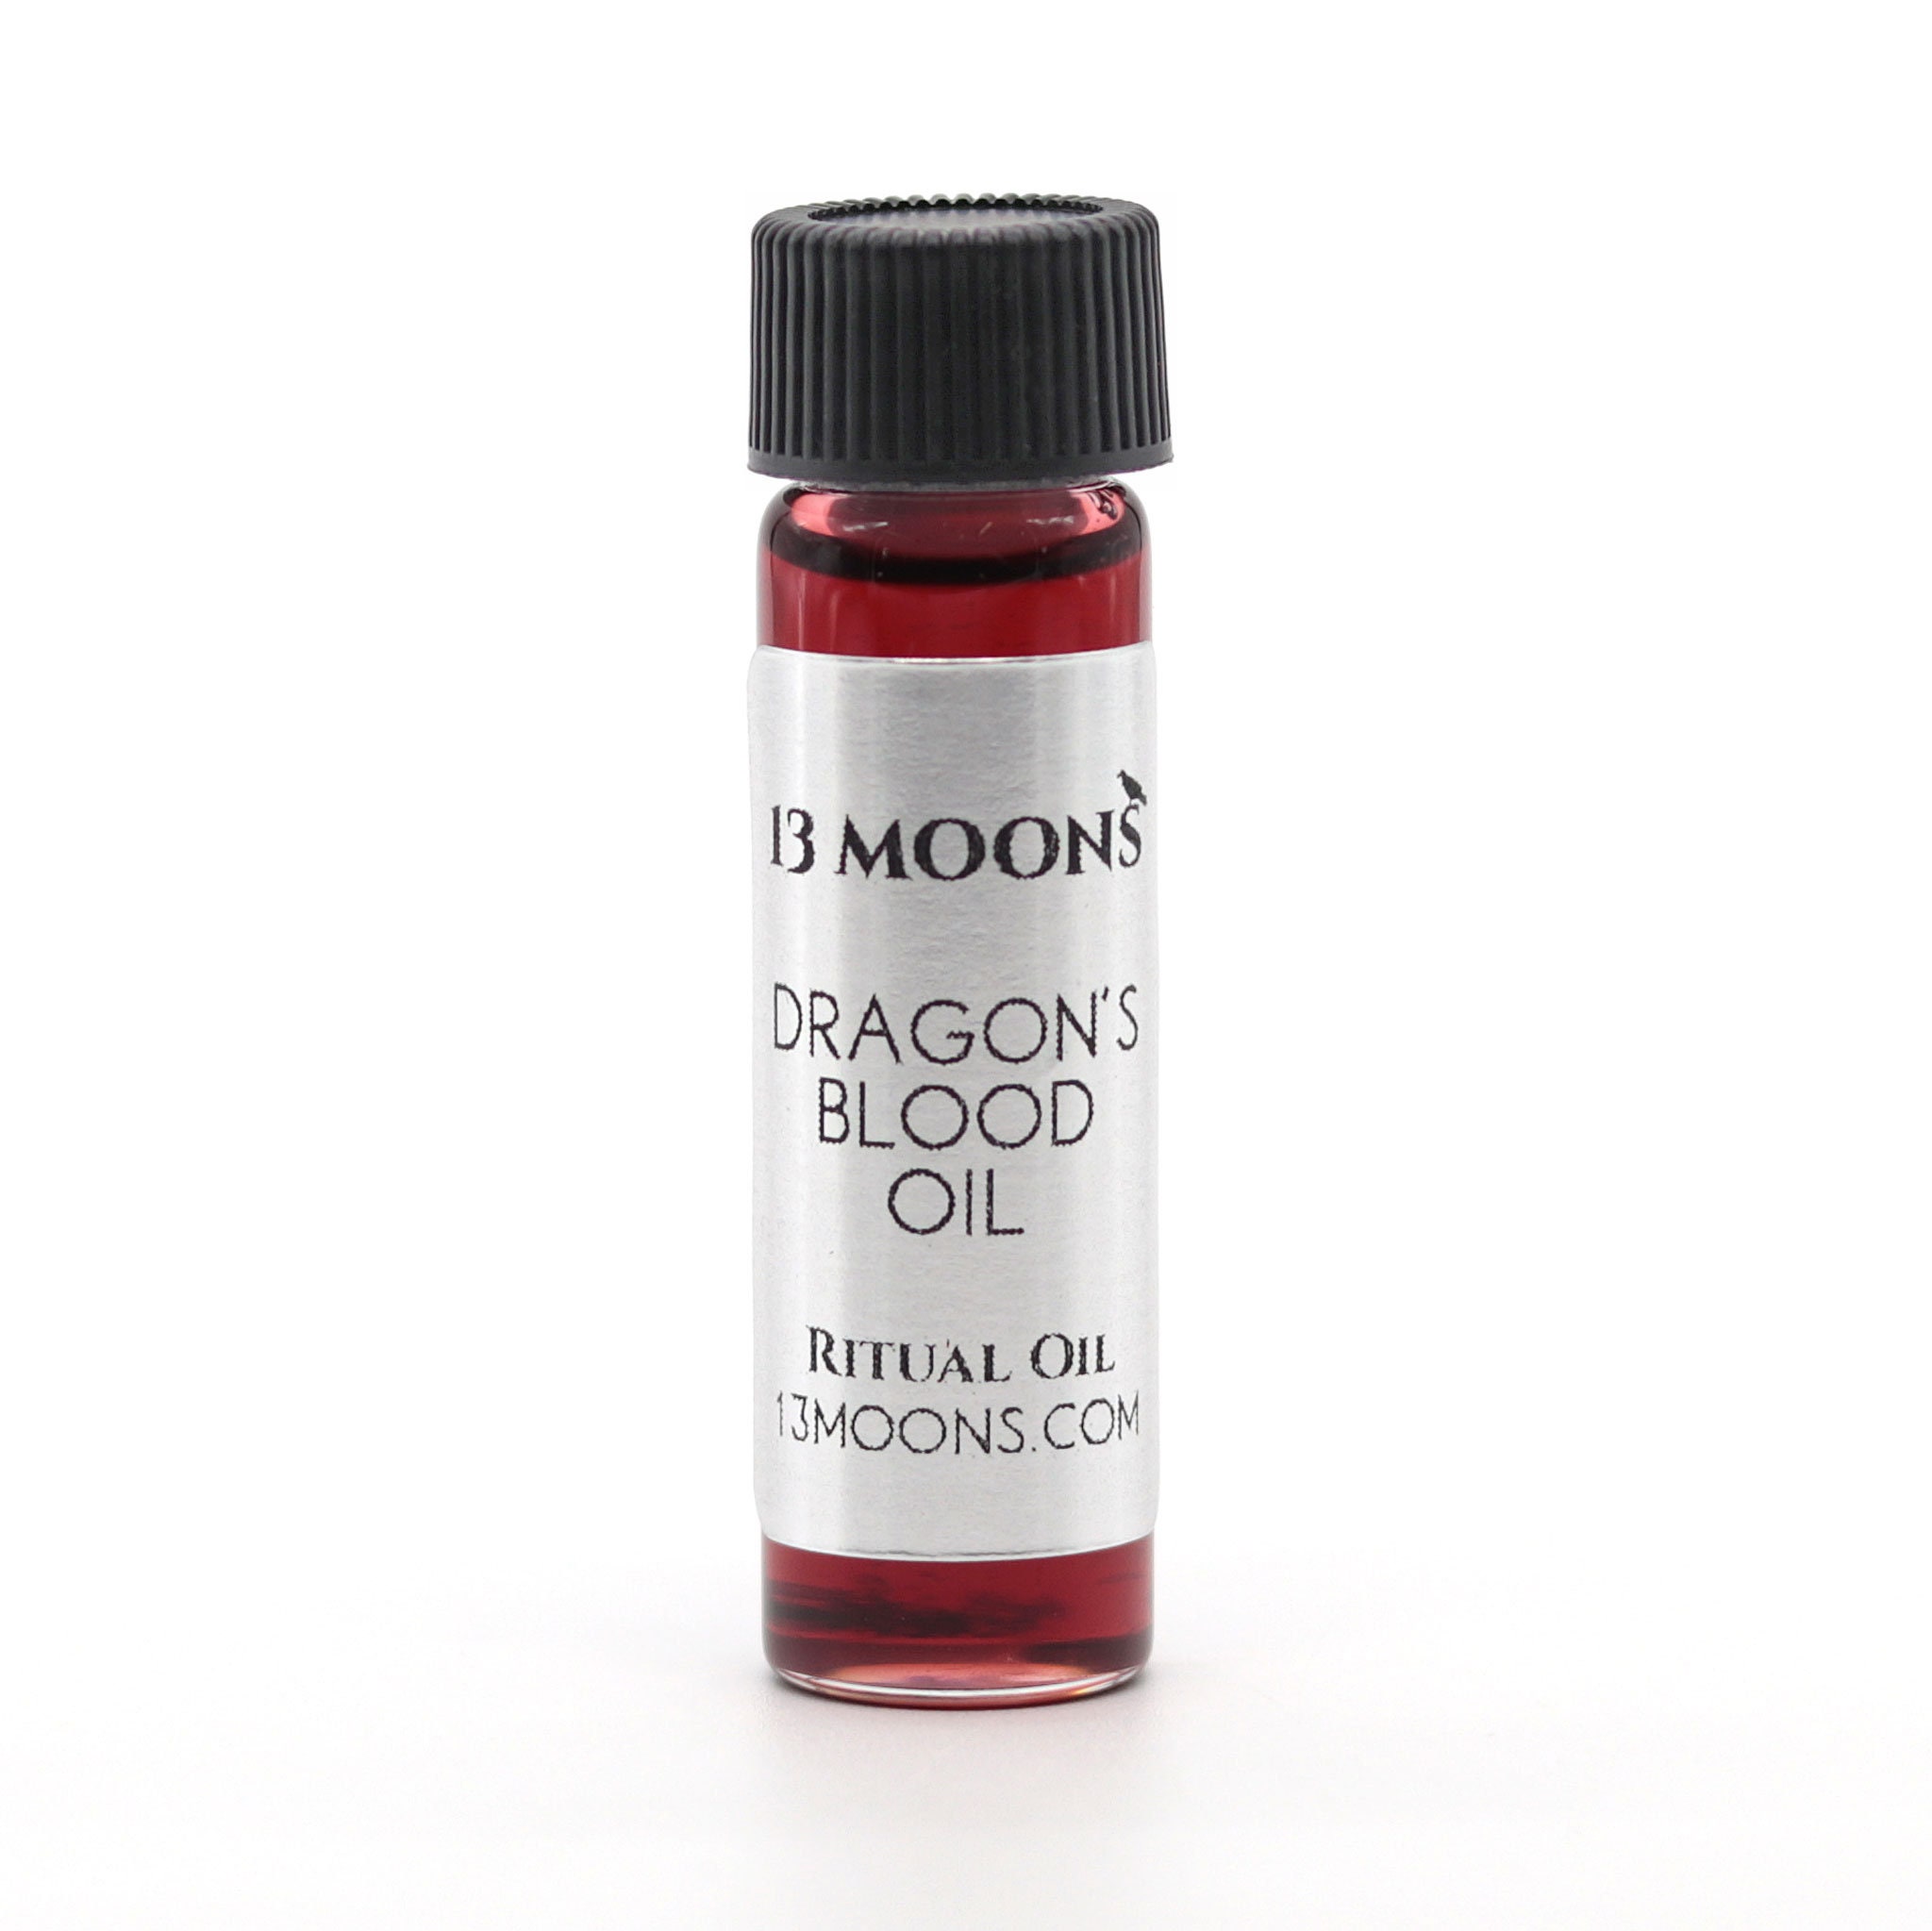 Dragons Blood Oil by 13 Moons, Spiritual Oil, Ritual Oil, Anointing Oil,  Blended Essential Oils for Wicca, Witchcraft Ritual Oil -  Norway